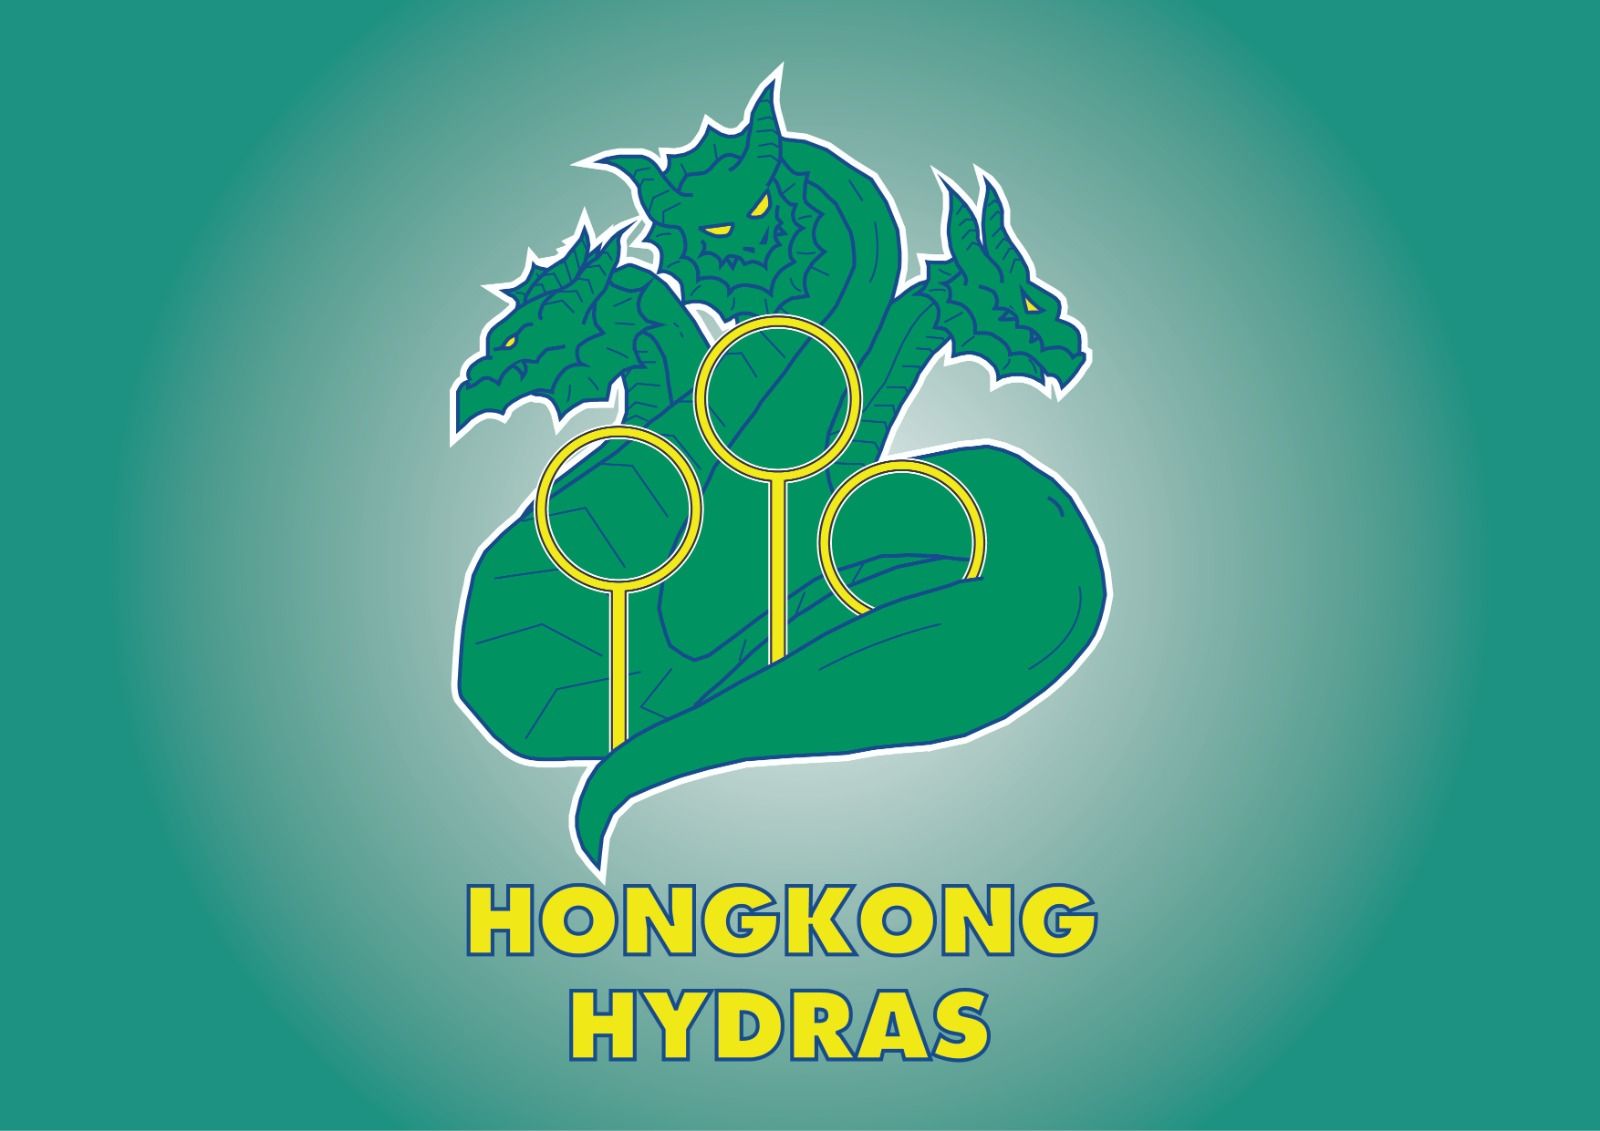 Hongkong Hydras Quidditch Club announced its logo and new kit and launched a fundraiser